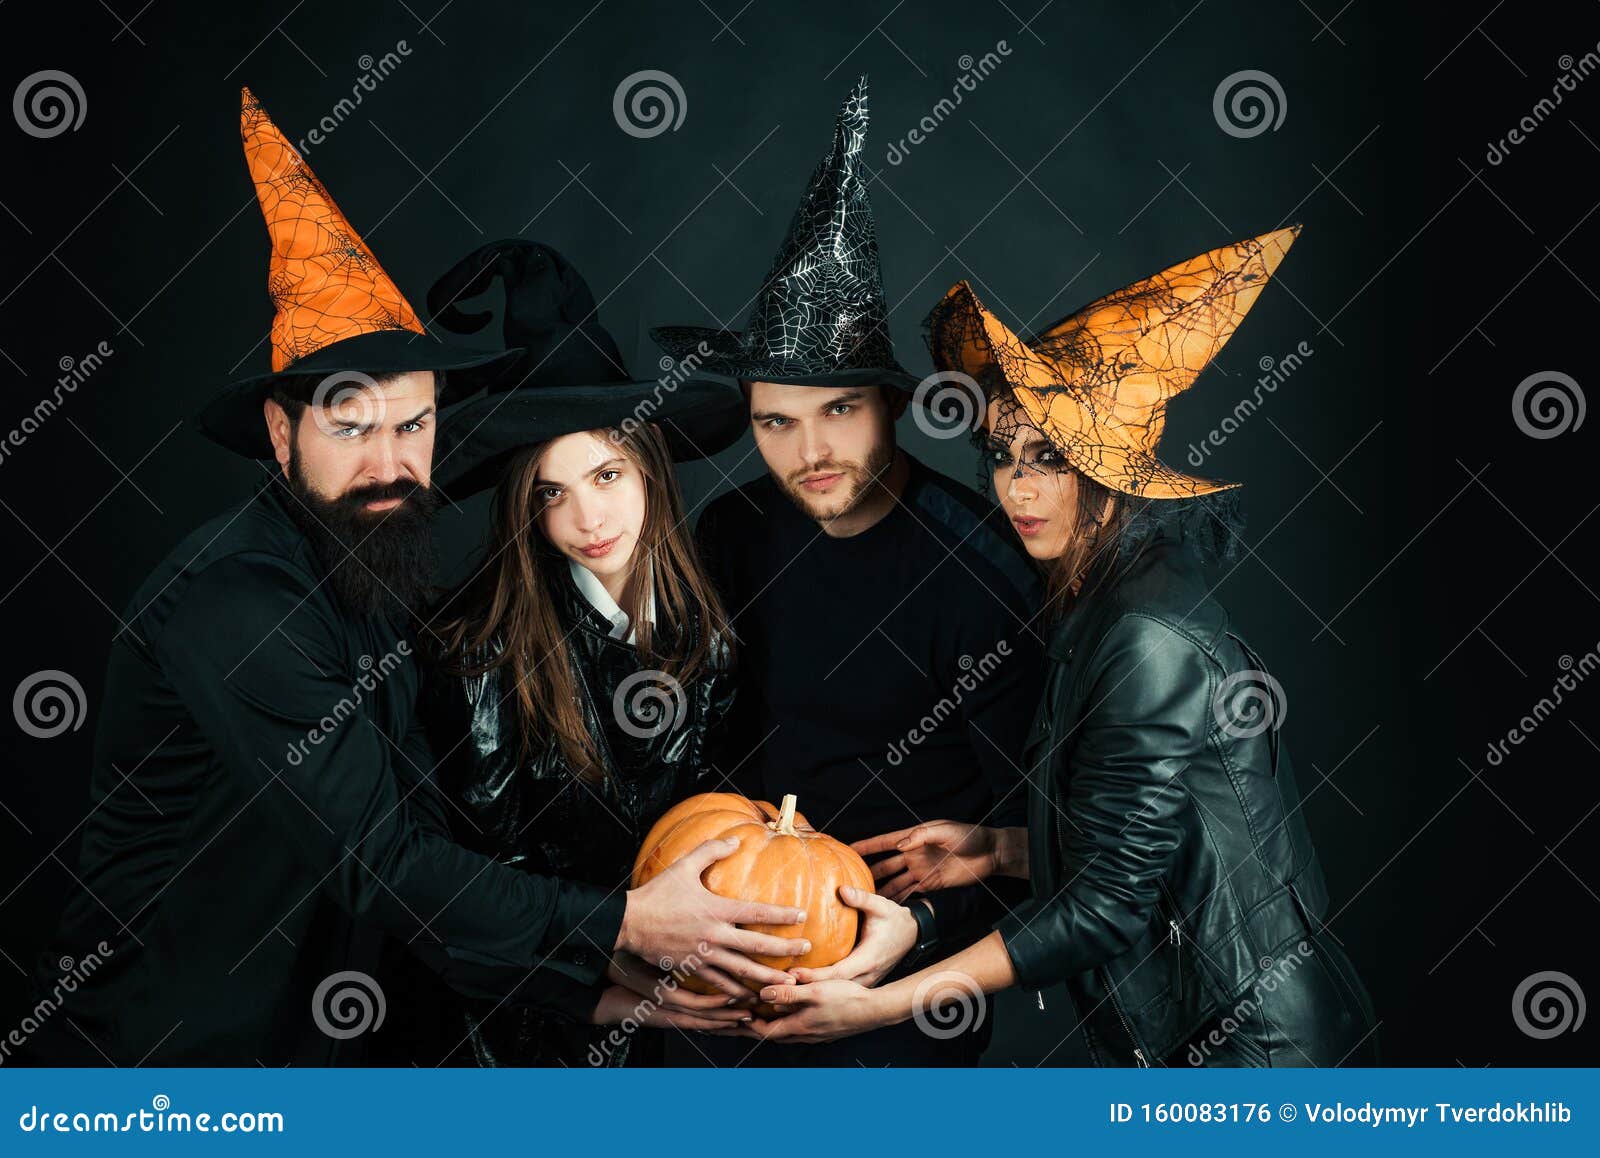 Best Ideas for Halloween. Group Posing with Pumpkin. Fashion Glamour ...